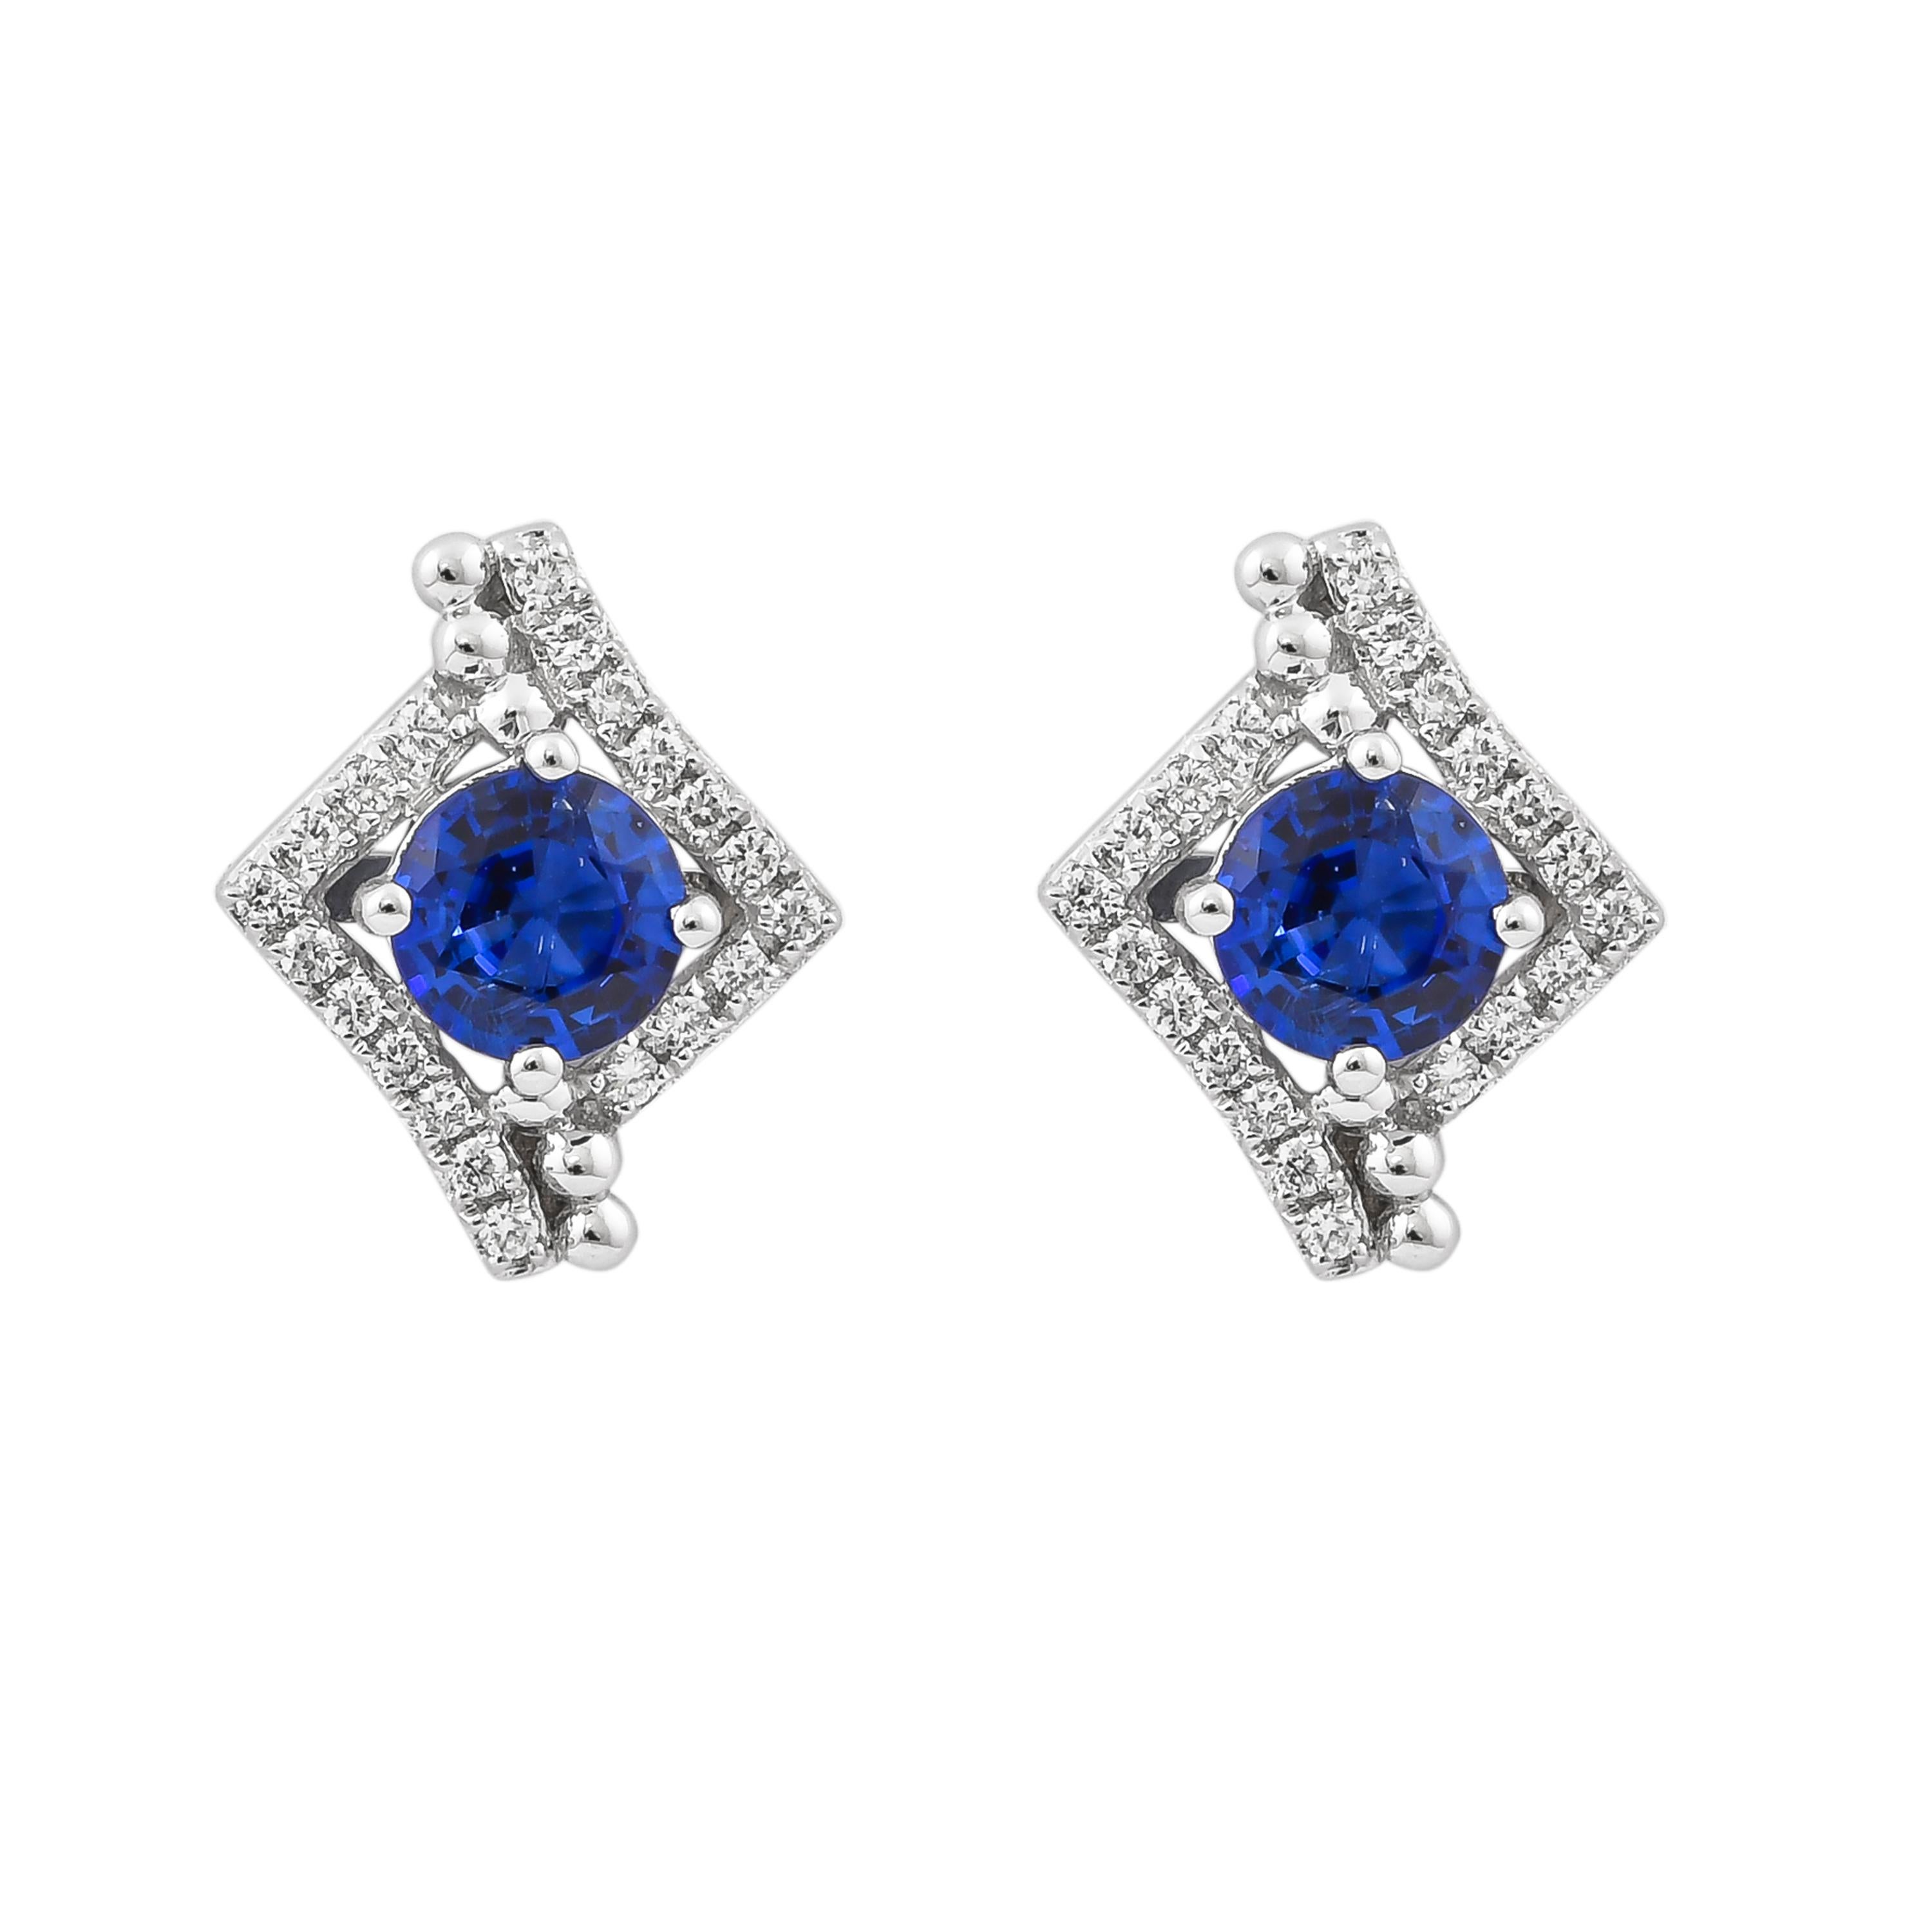 Round Cut 1.1 Carat Blue Sapphire and Diamond Earring in 18 Karat White Gold For Sale